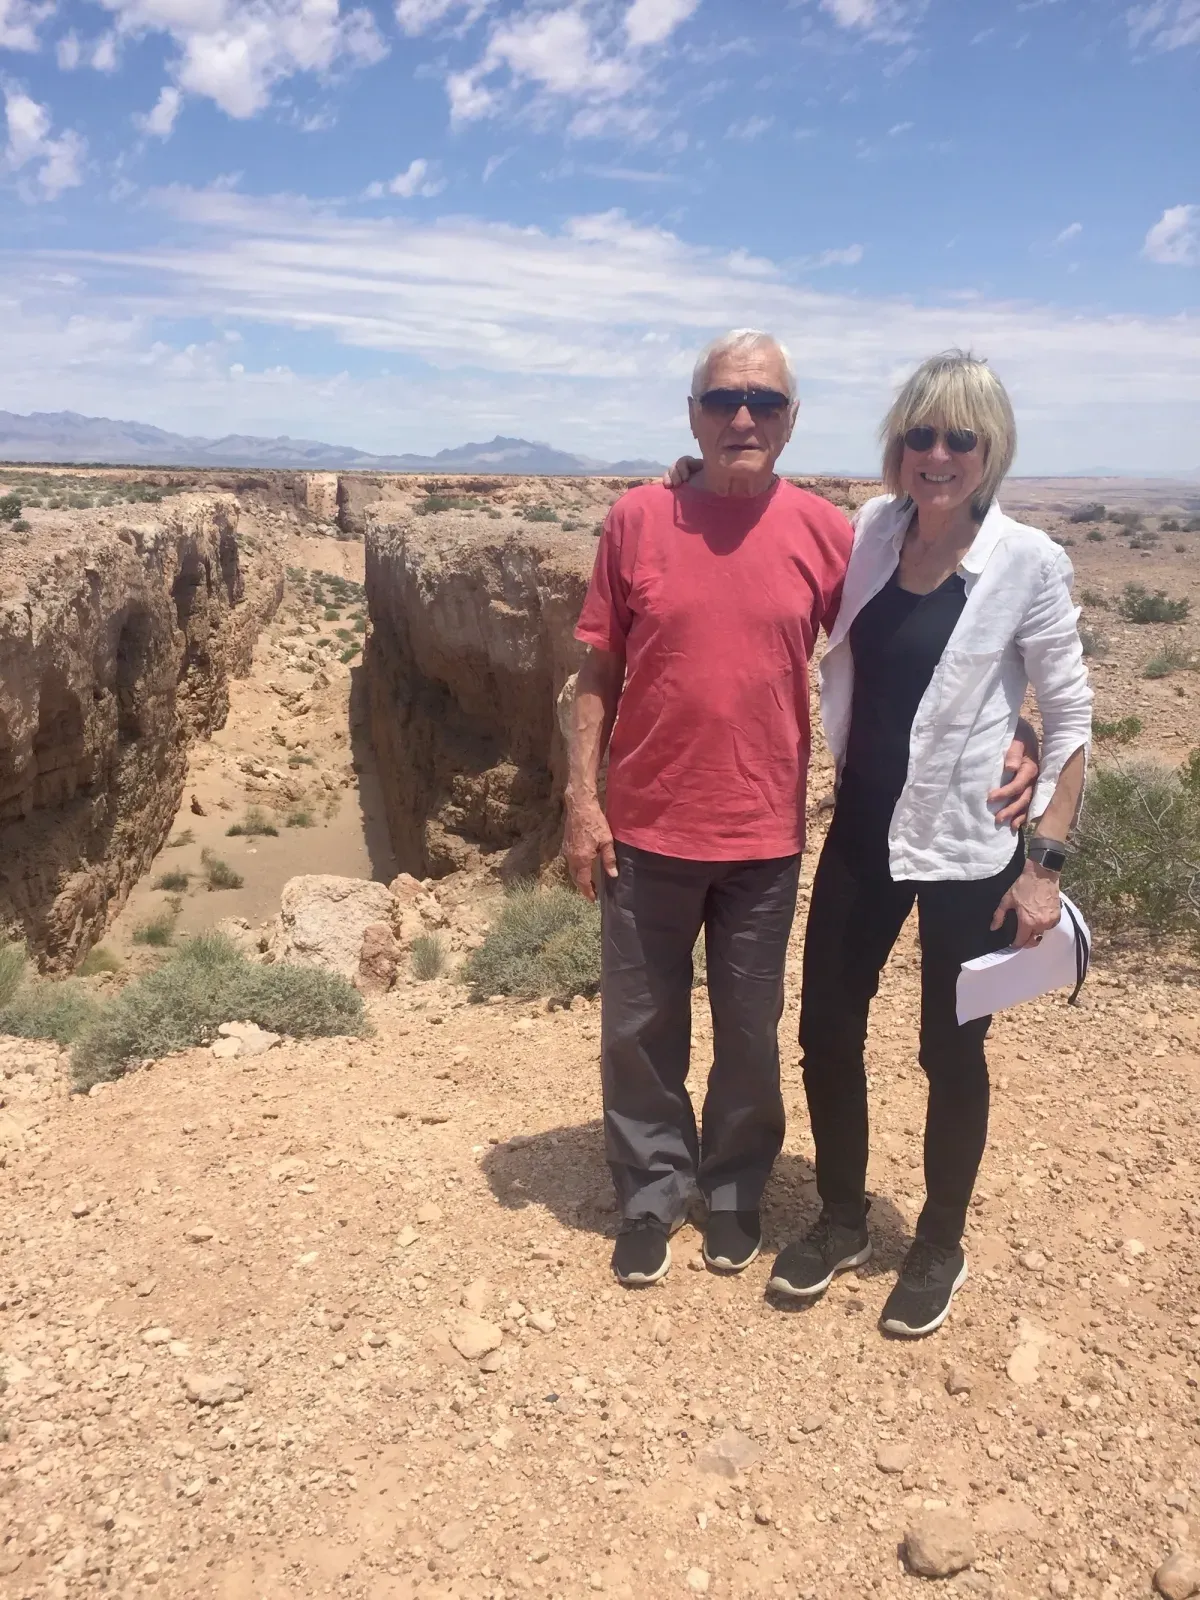 The poet and artist John Giorno with the author at Michael Heizer’s Double Negative.